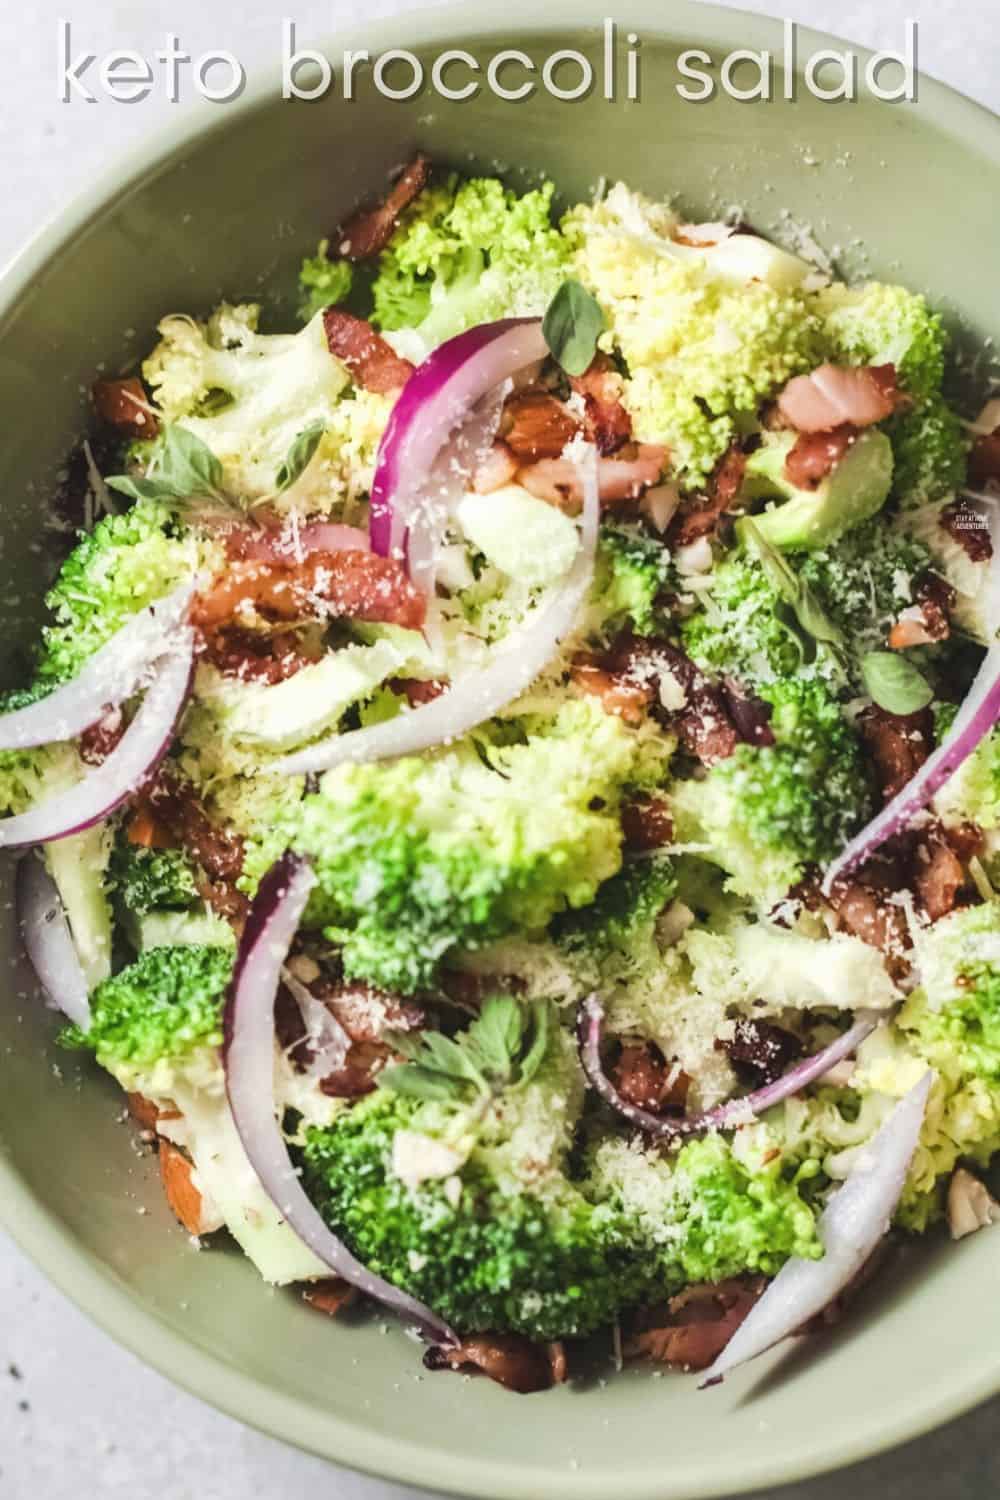 Discover the perfect balance of flavors and textures in a broccoli salad, and try our delicious Keto Broccoli Salad Recipe for a healthy, low-carb twist on this classic dish. via @mystayathome